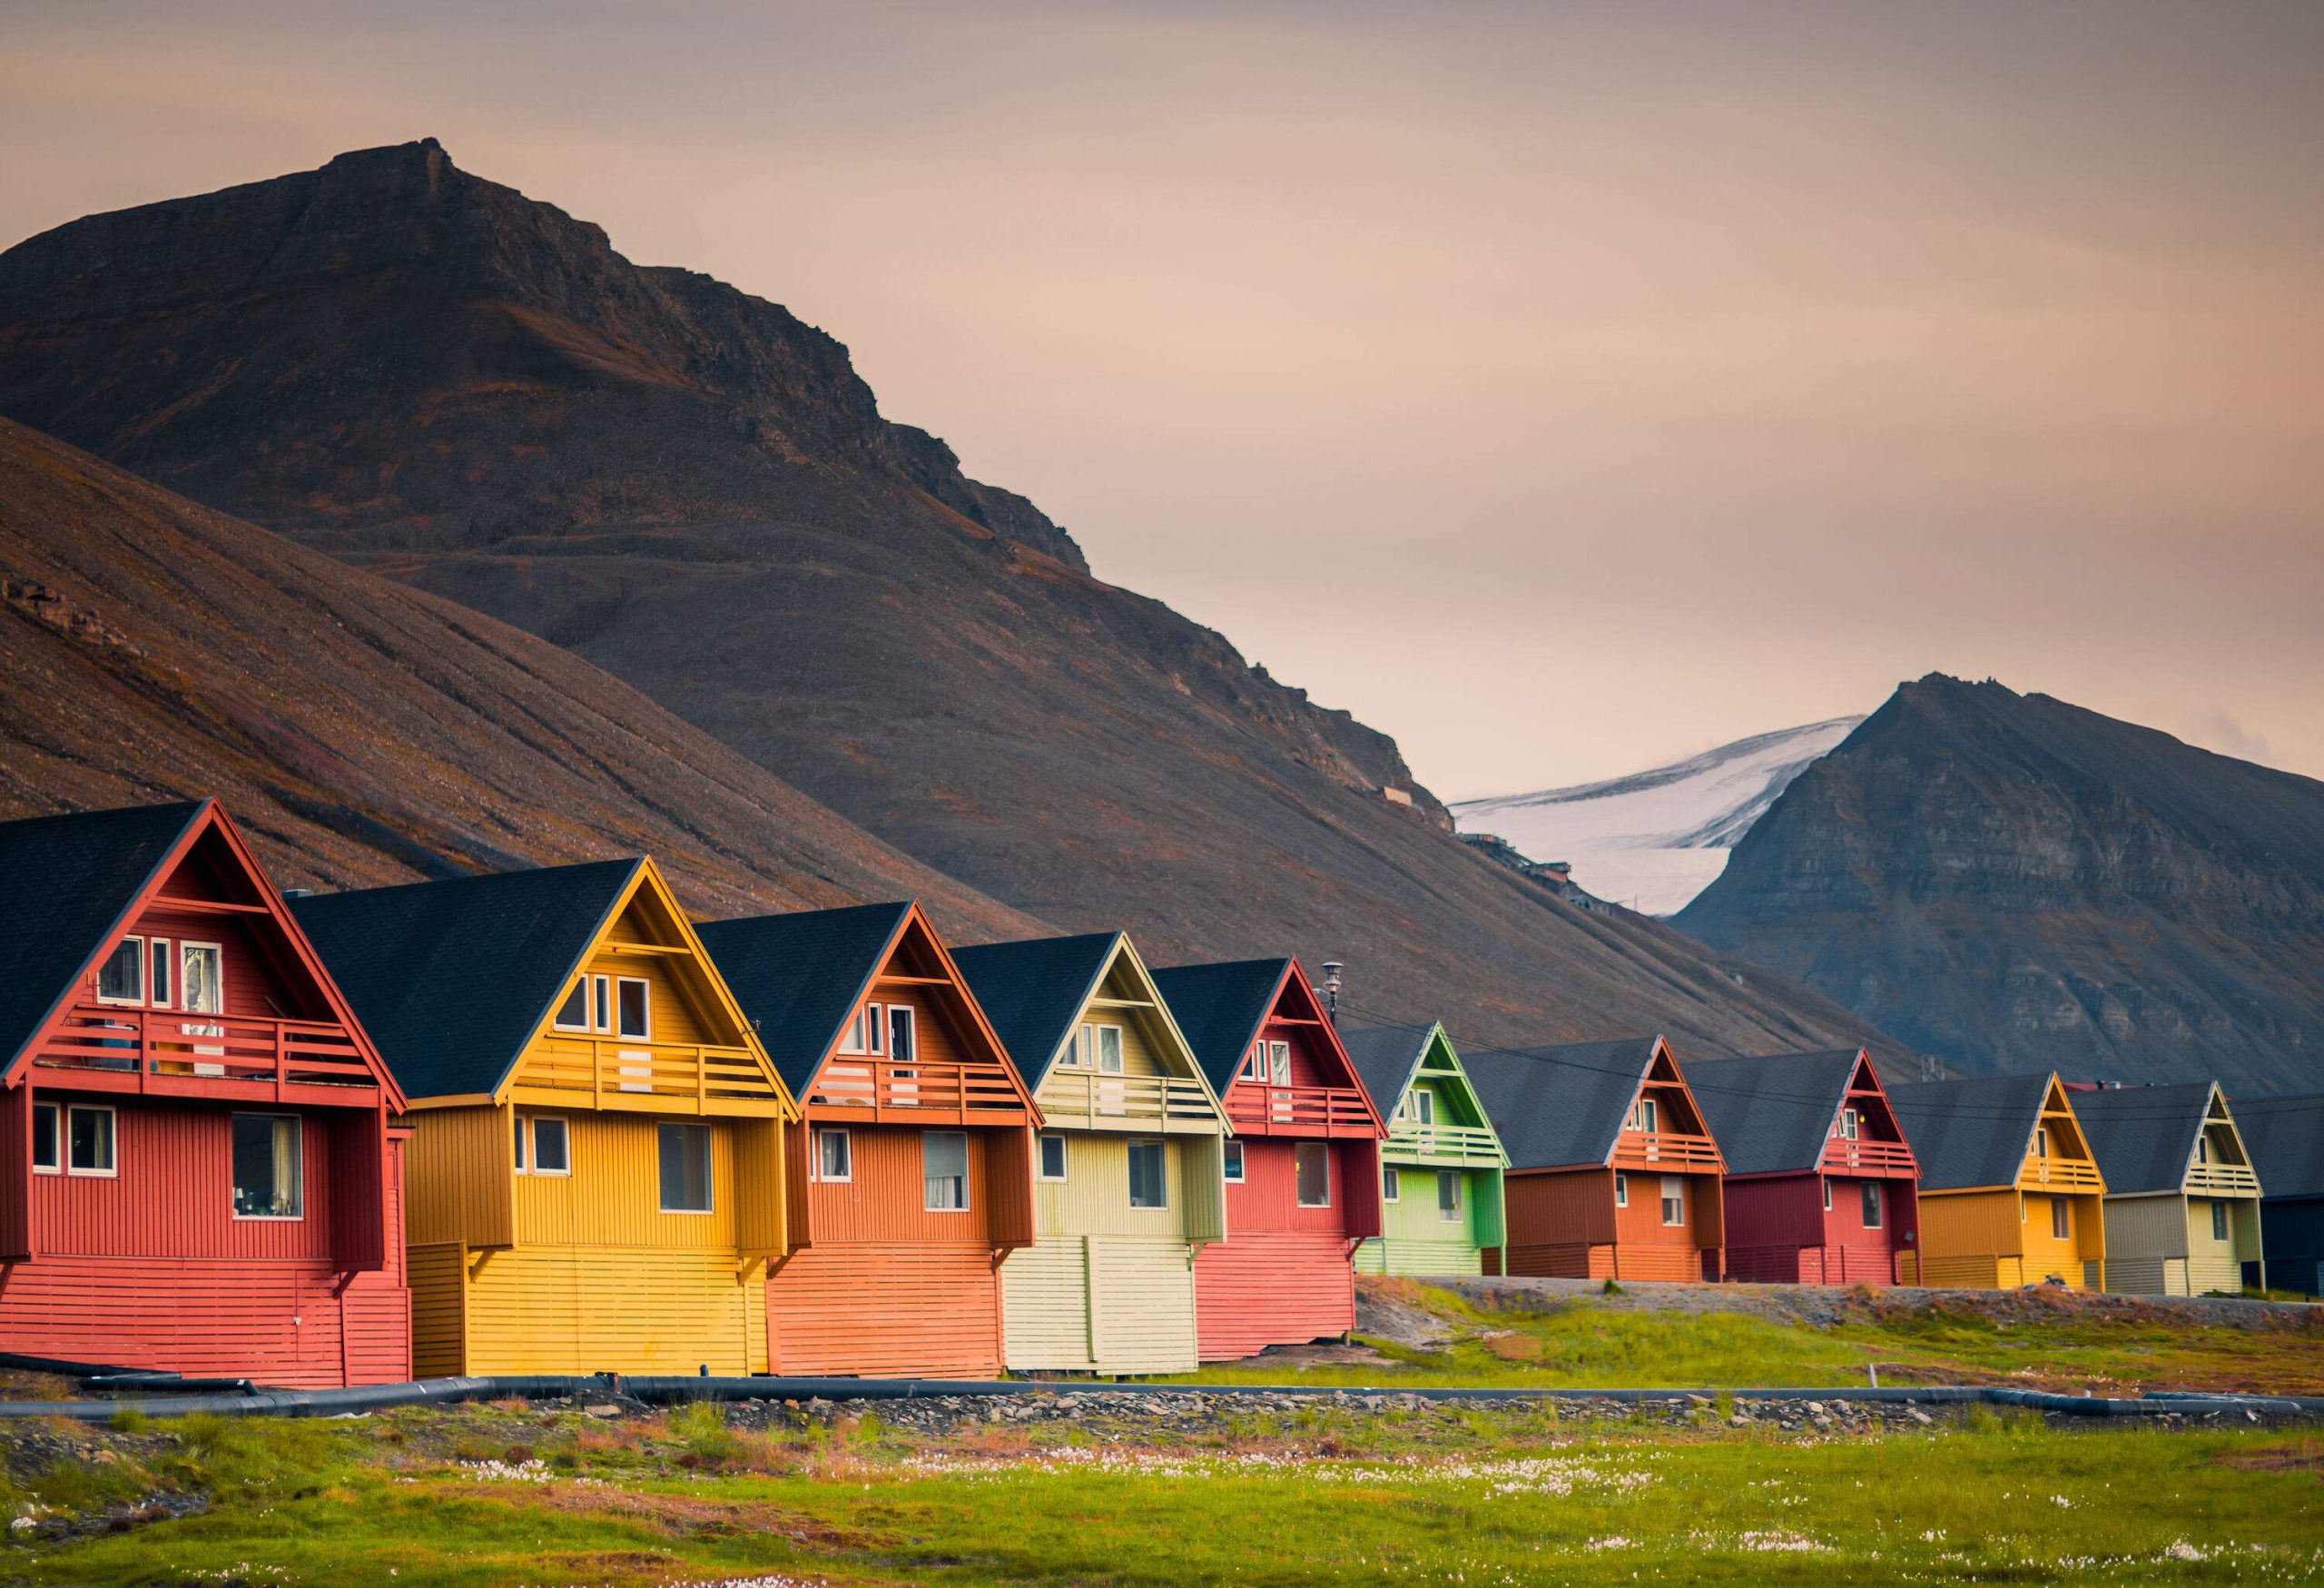 A row of wooden cabins with colourful façades at the foot of the mountains.